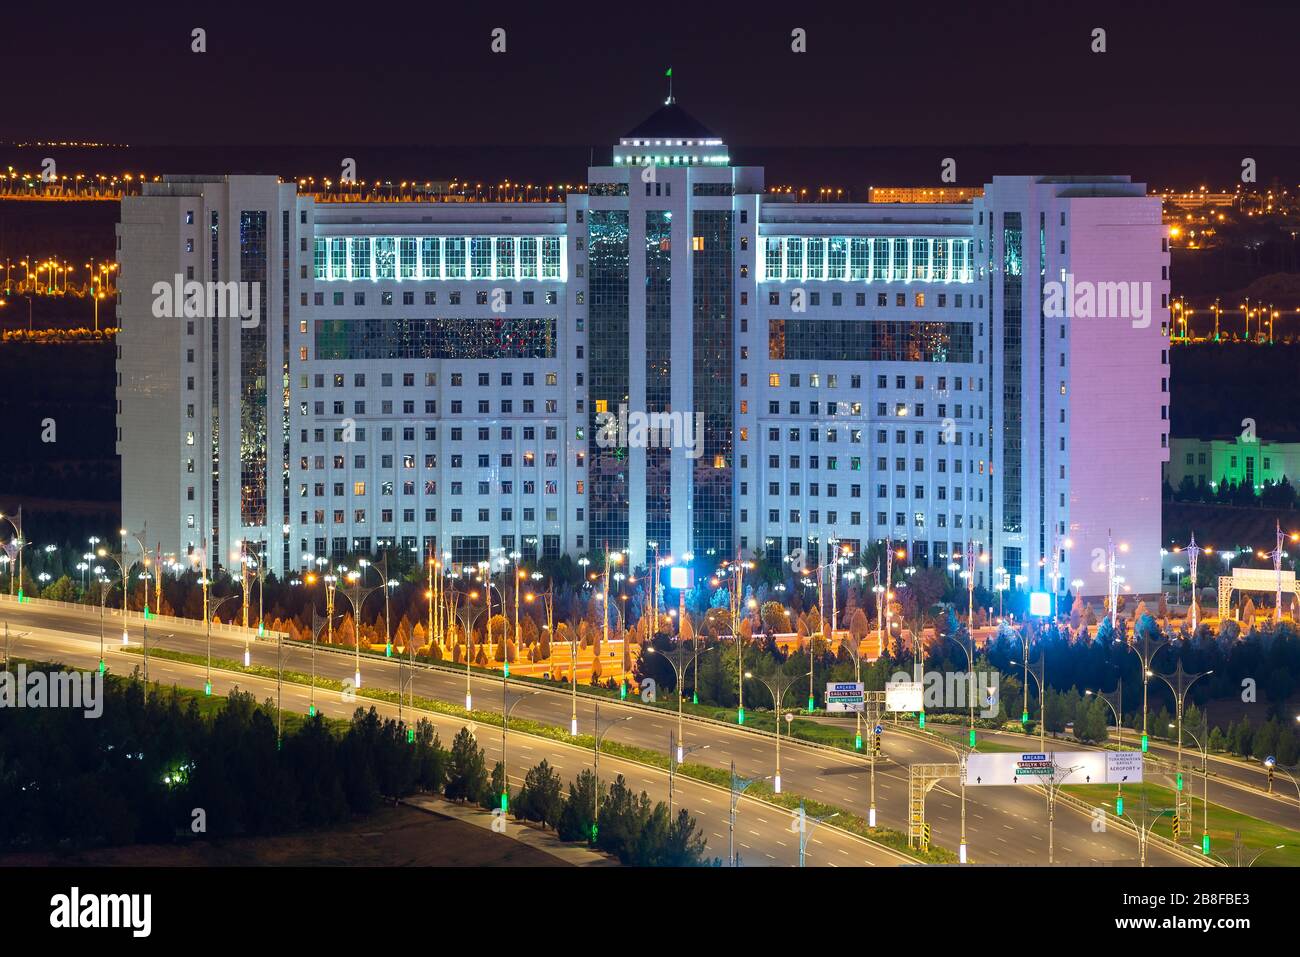 Massive white marble curved building in Ashgabat Turkmenistan. Empty Archabil Highway in foreground with beautiful lamp posts in an exotic city. Stock Photo